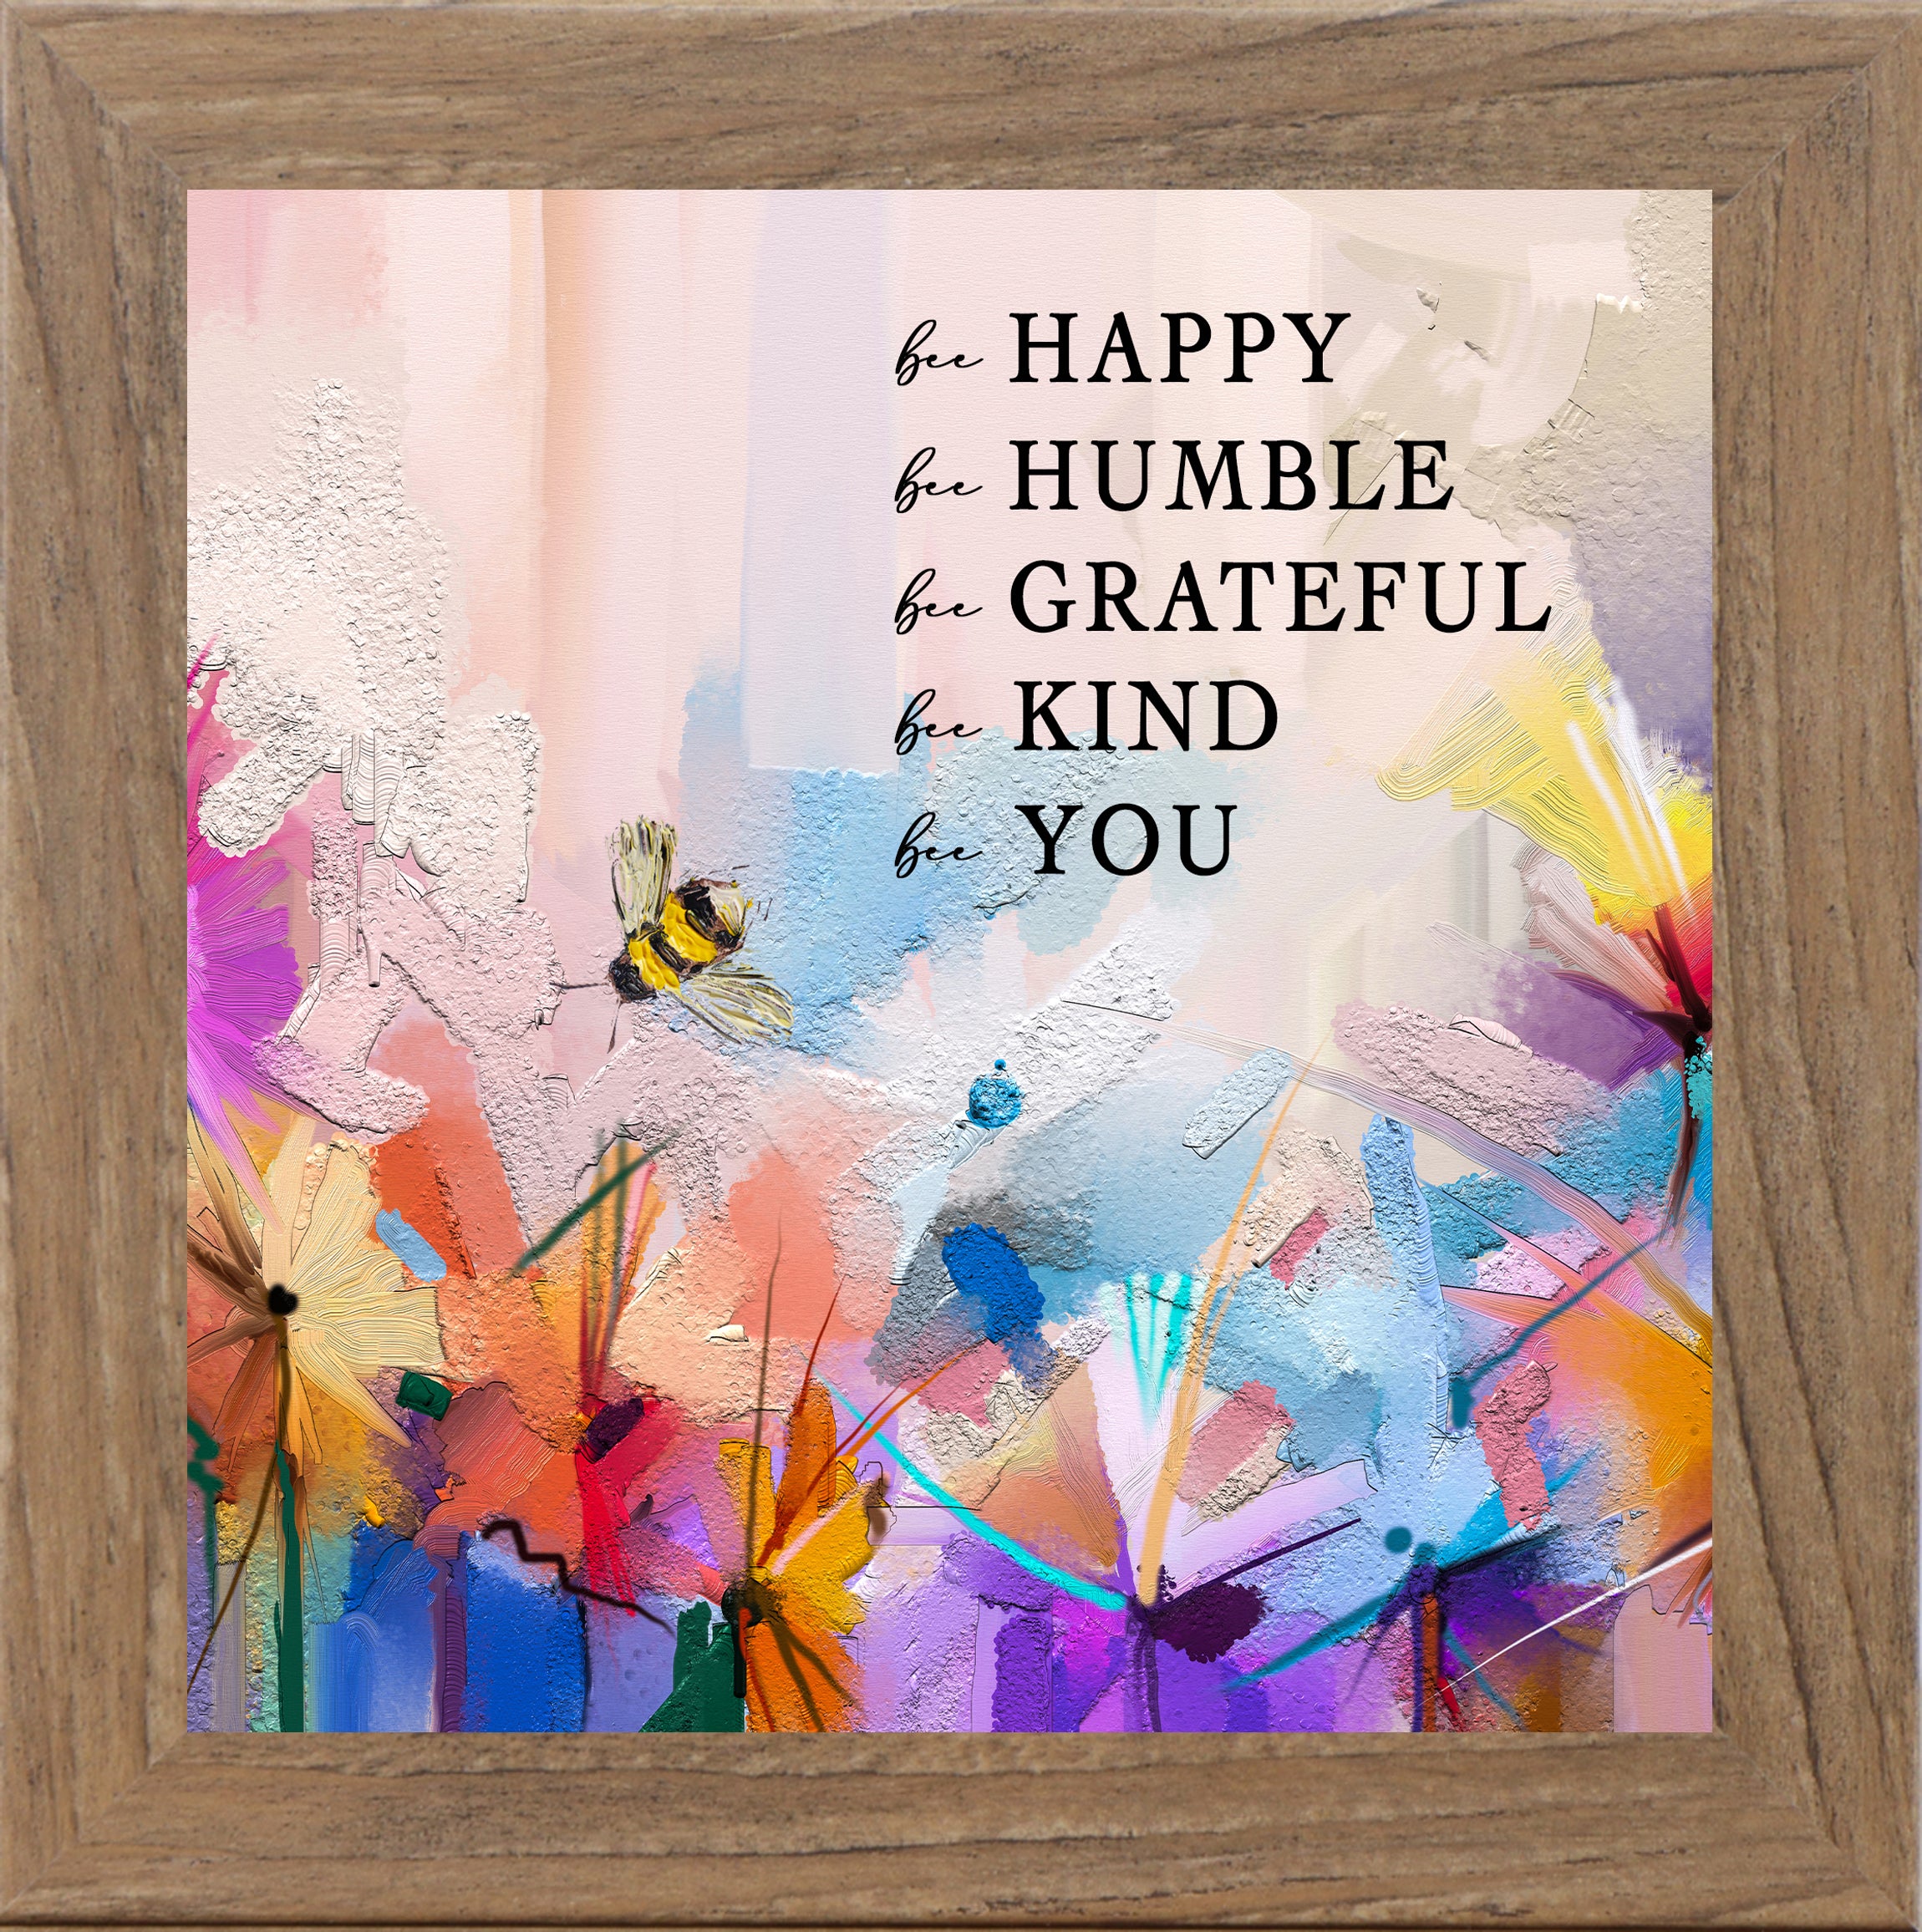 Bee Happy, Humble, Grateful, Kind, You by Summer Snow SN29